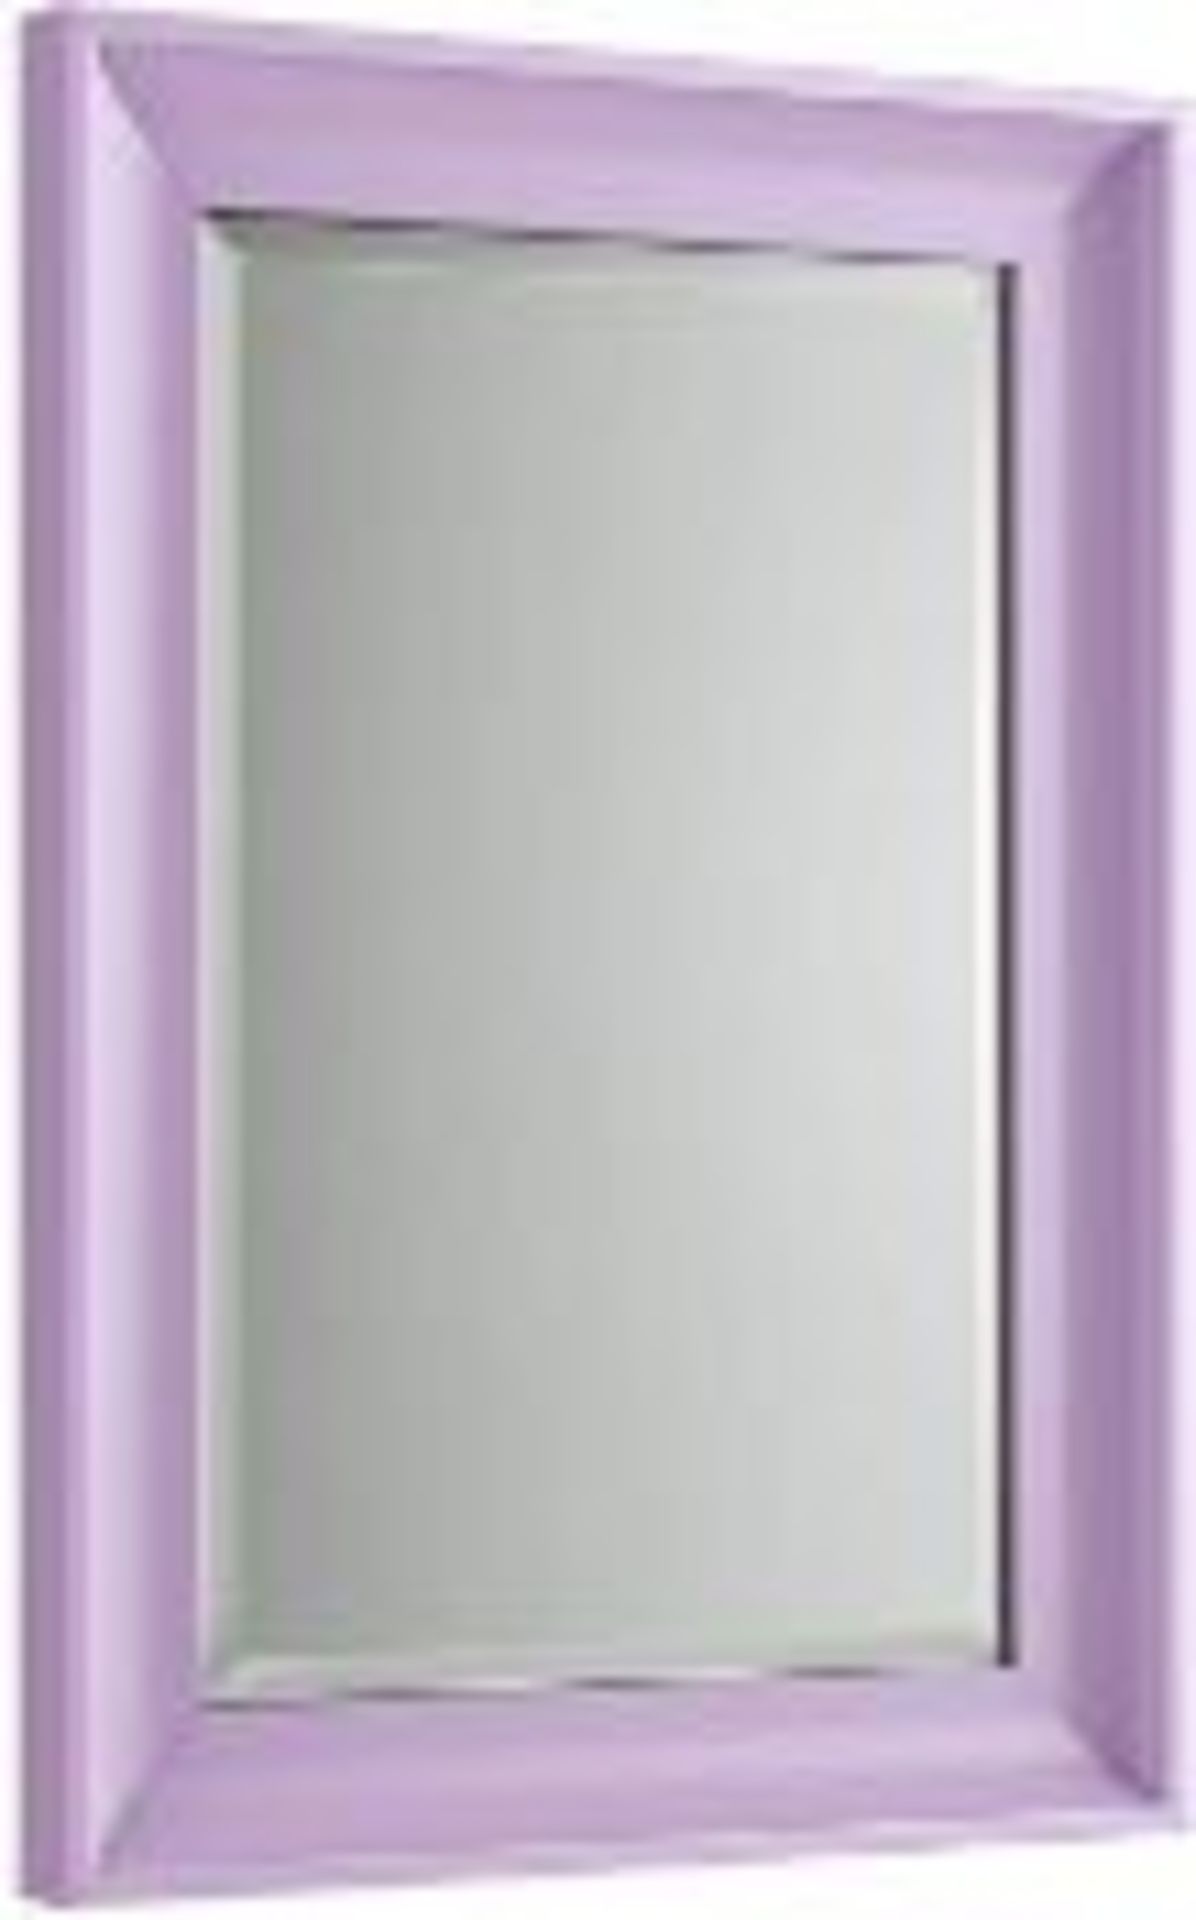 New 700x500mm Melbourne Purple Framed Mirror. RRP £209.99.Ml8019 Adds A Funky, Stylish Look To...